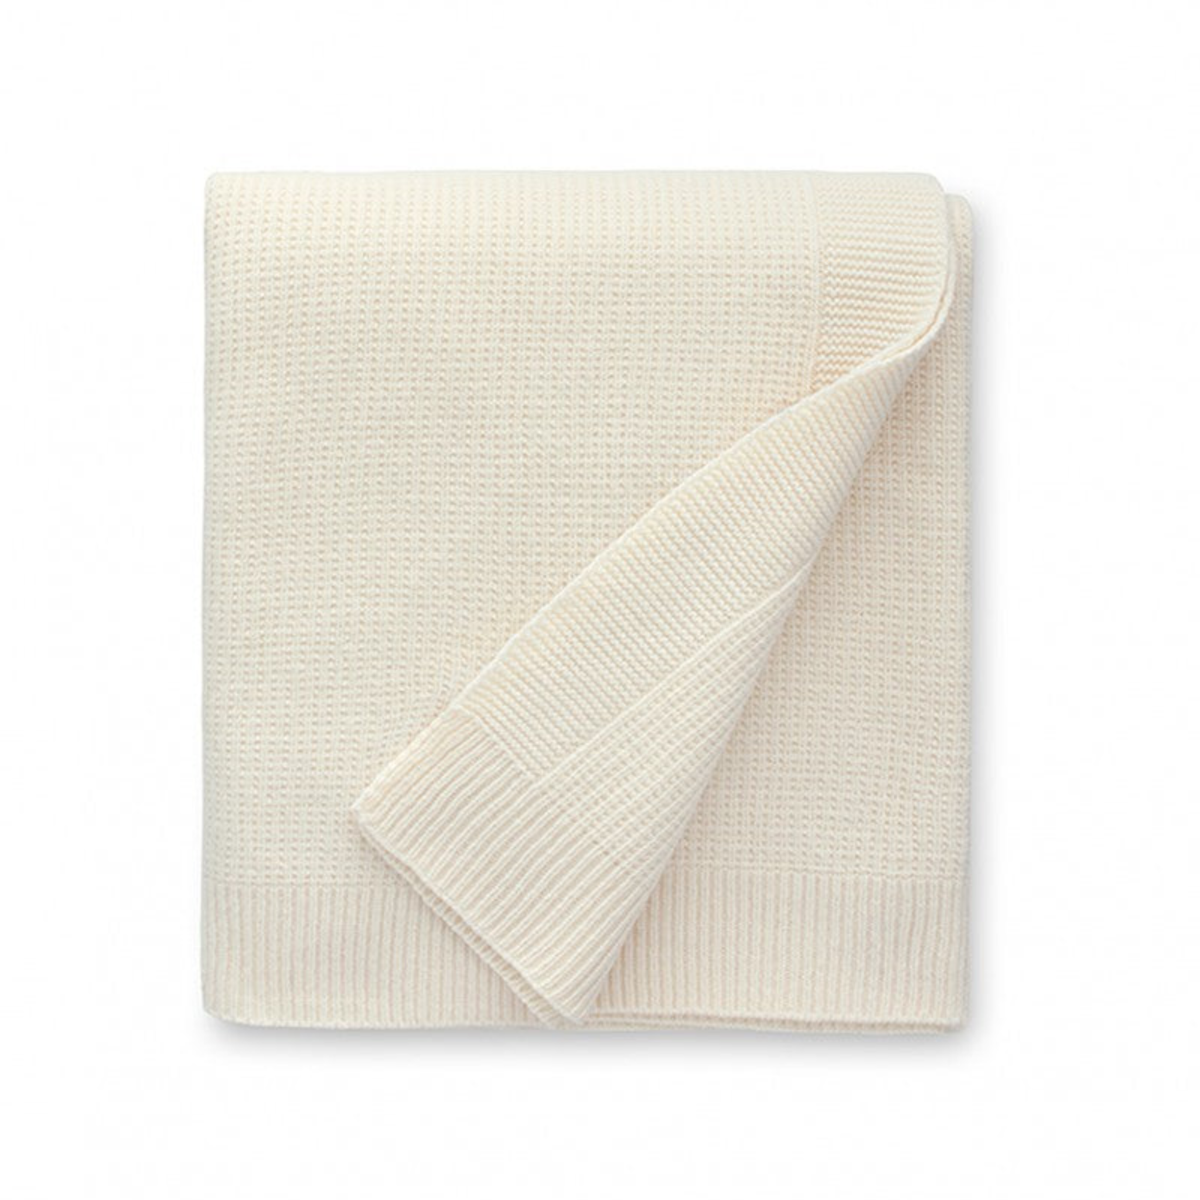 Folded Image of Sferra Pettra Throw in Eggshell Color